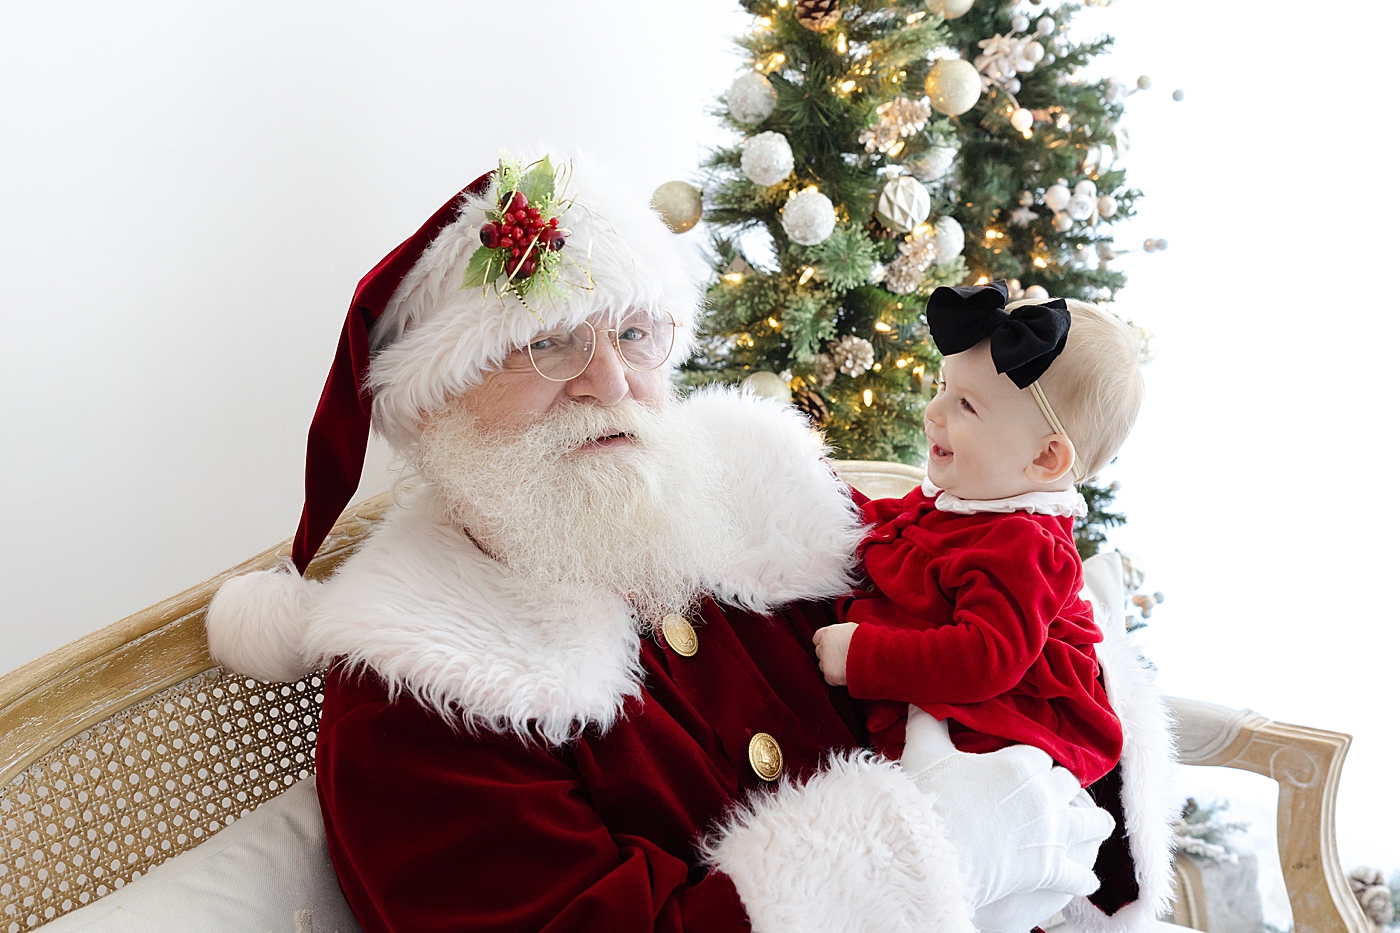 Santa holding a baby girl in a red dress | Image by Sana Ahmed Photography